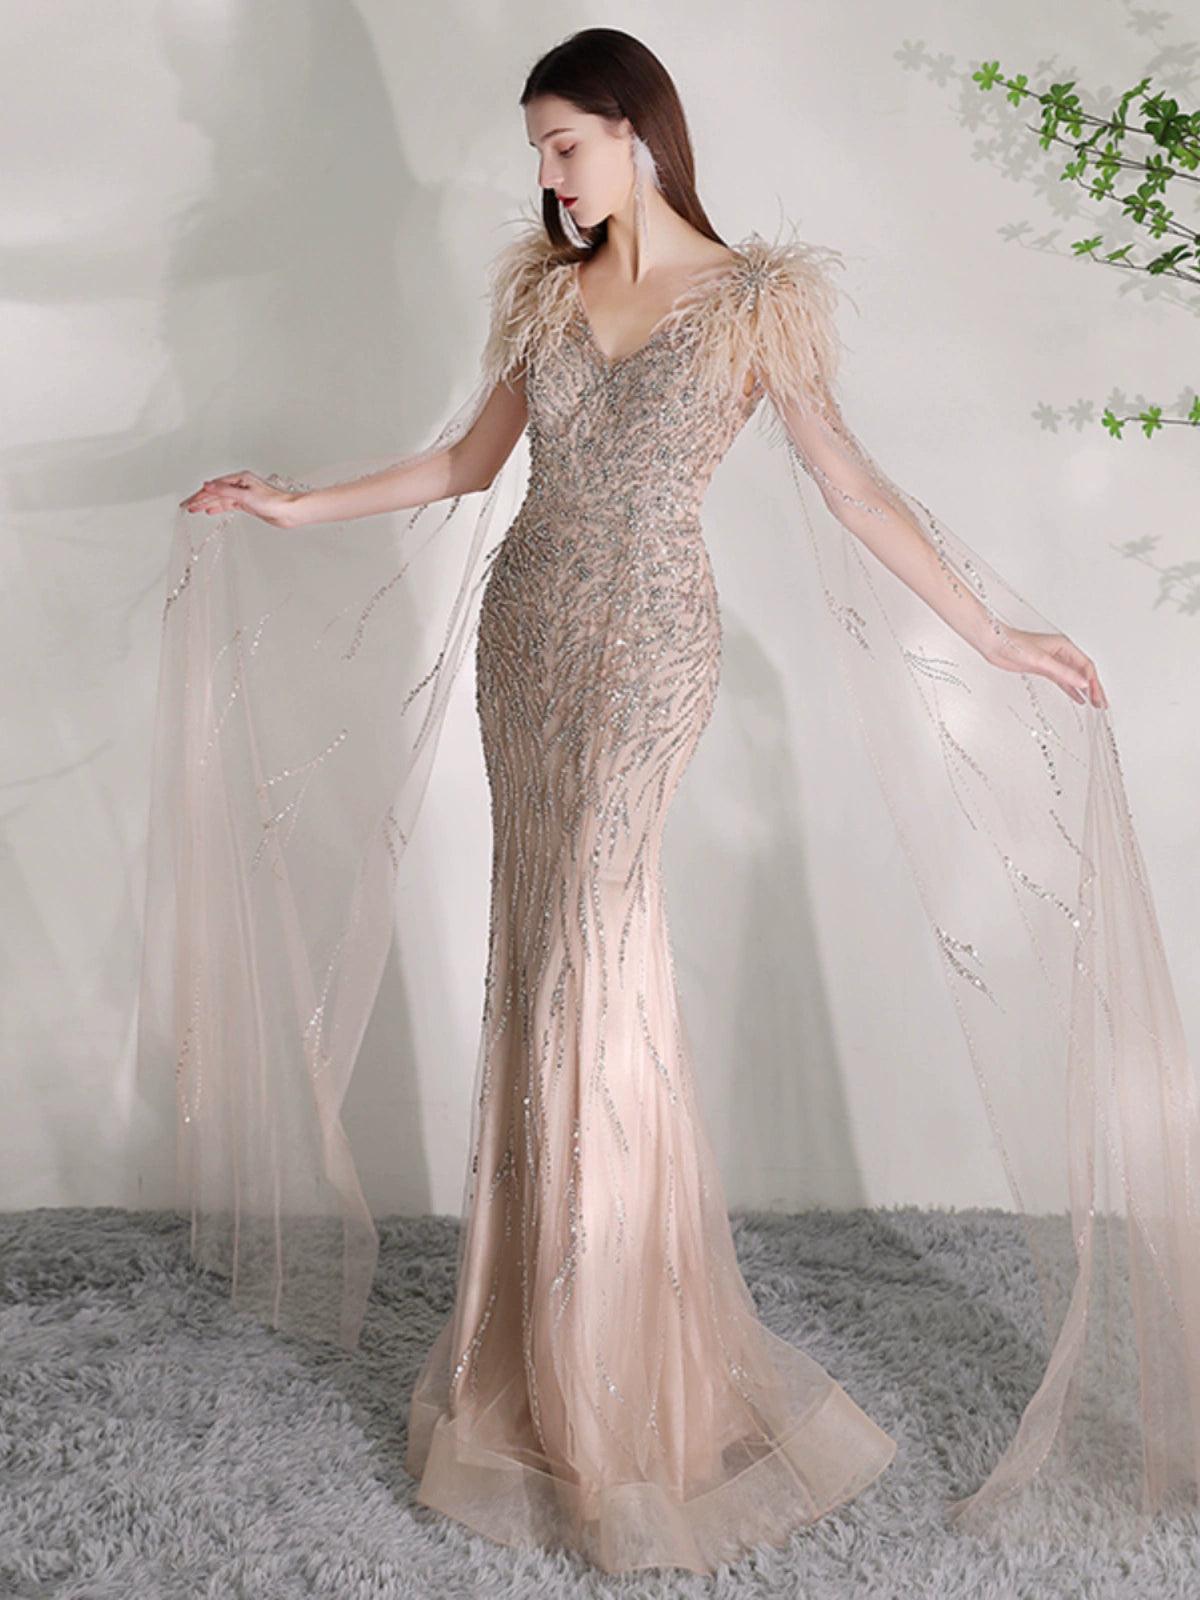 Women's Mermaid Evening Dress Long Formal Dresses Sexy Beaded Prom Dresses for Women - numbersea